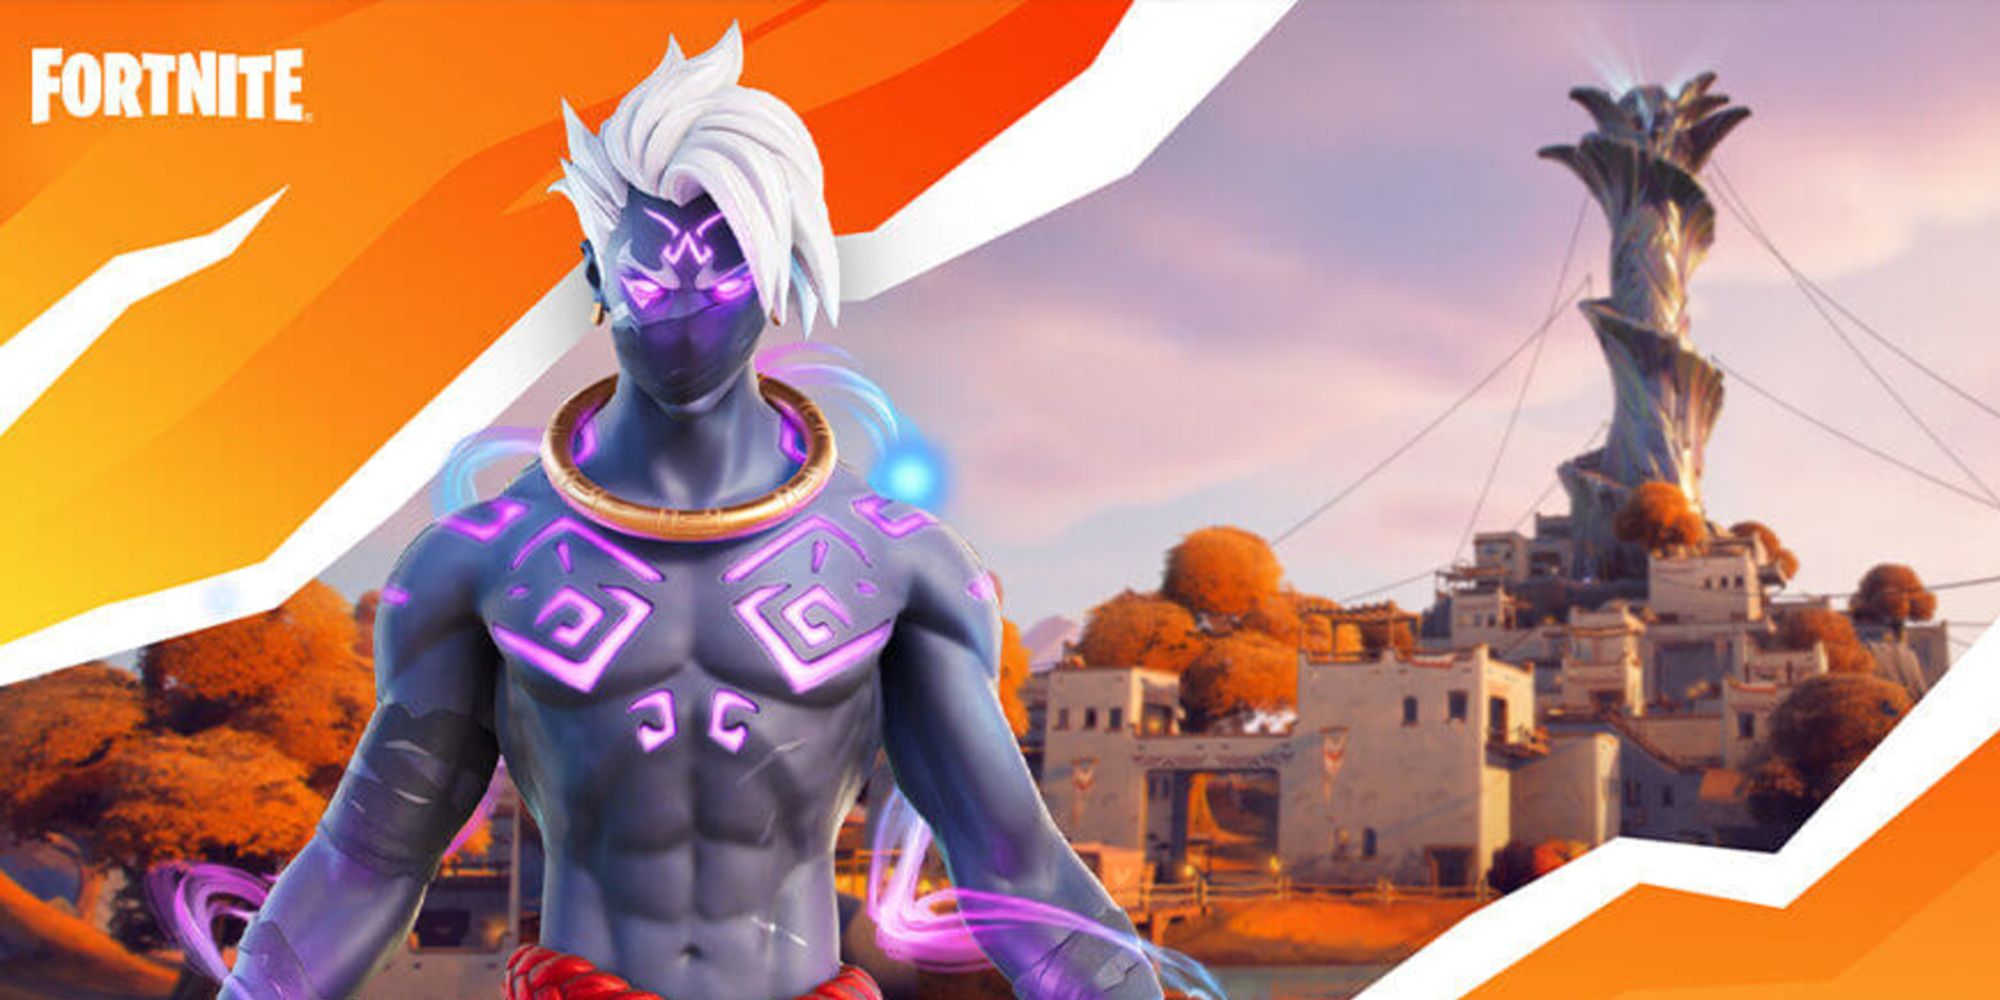 Glyph Master Raz standing against a city background in Fortnite